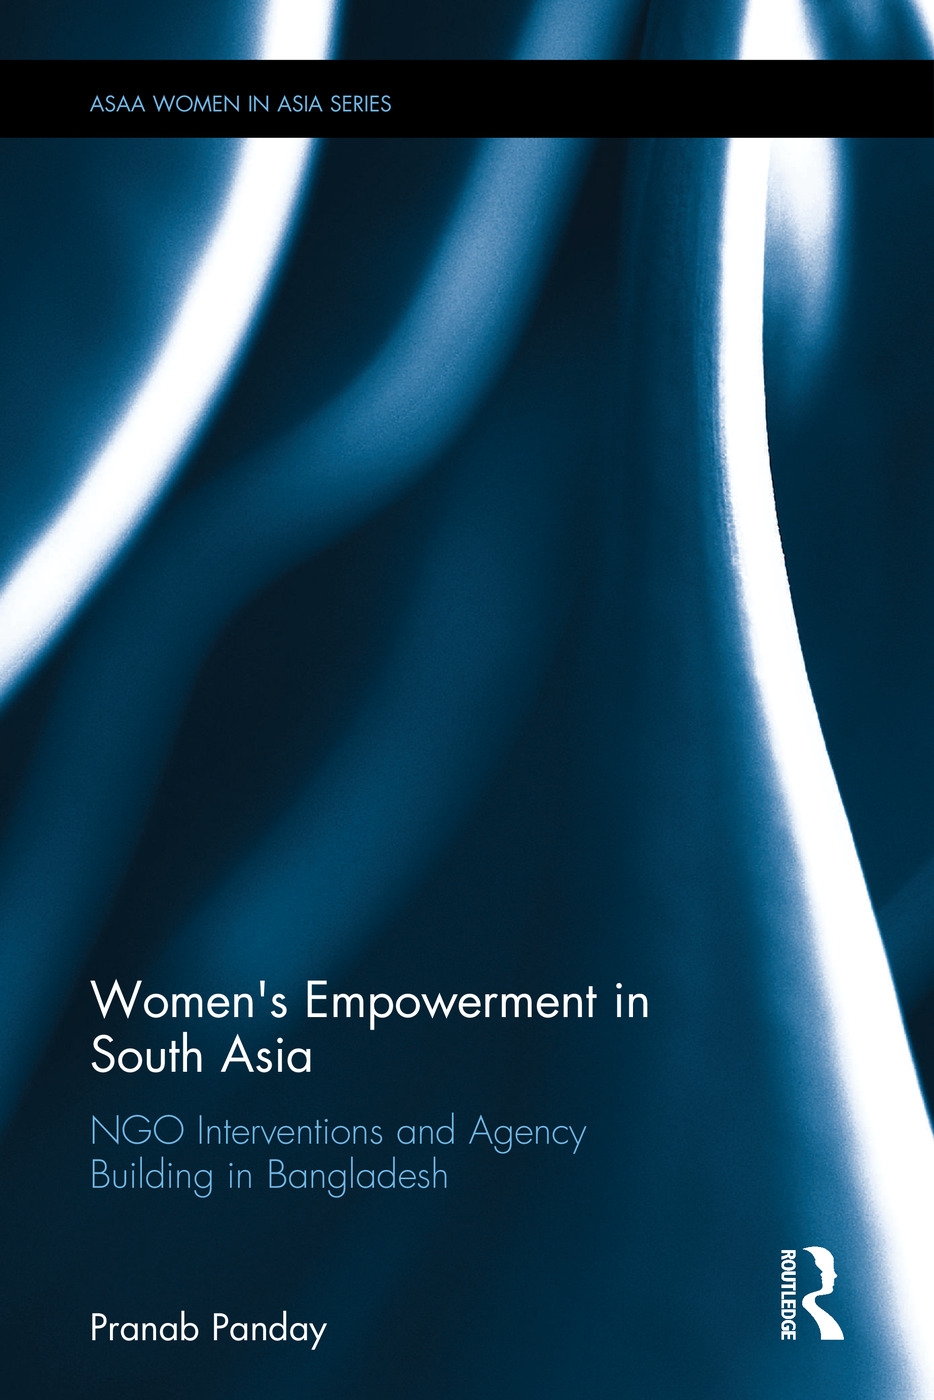 Women’s Empowerment in South Asia: Ngo Interventions and Agency Building in Bangladesh